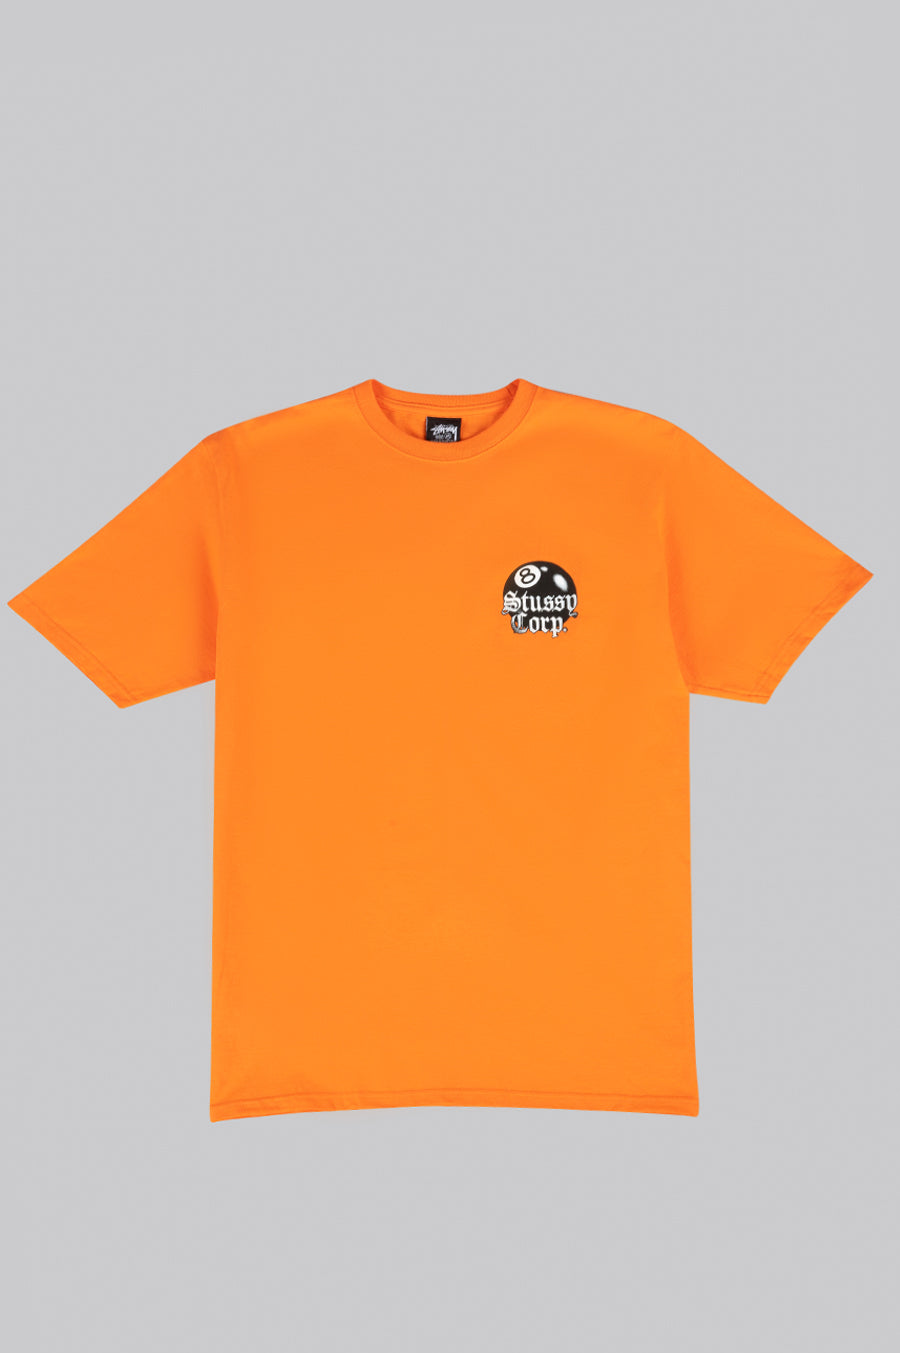 STUSSY 8 BALL CORP. TEE CORAL – BLENDS